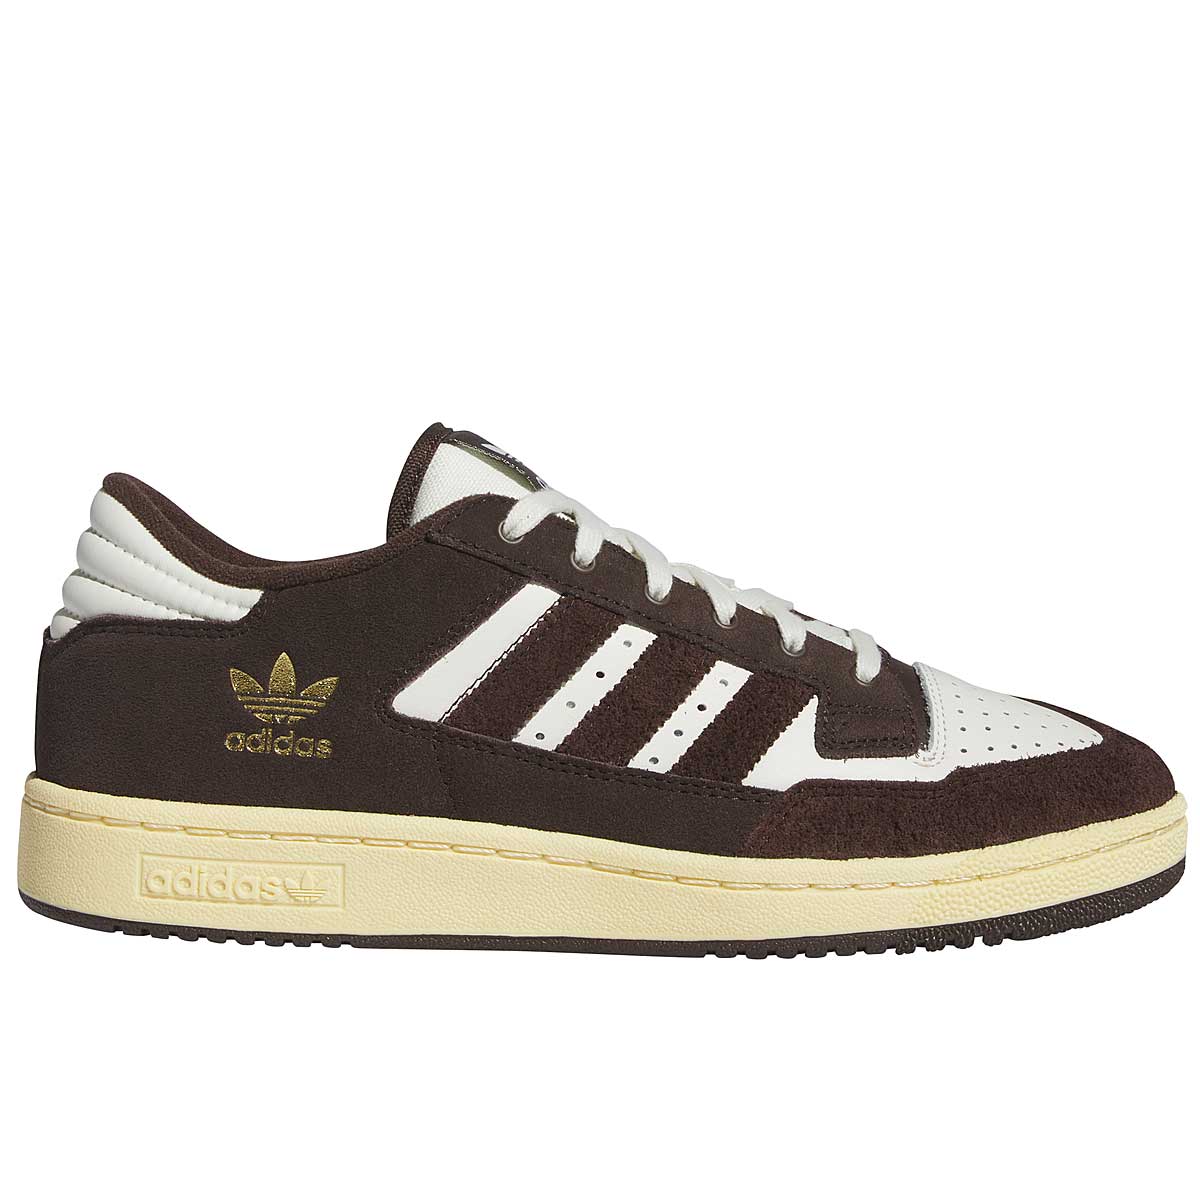 Image of Adidas Centennial 85 Lo, Brown/beige